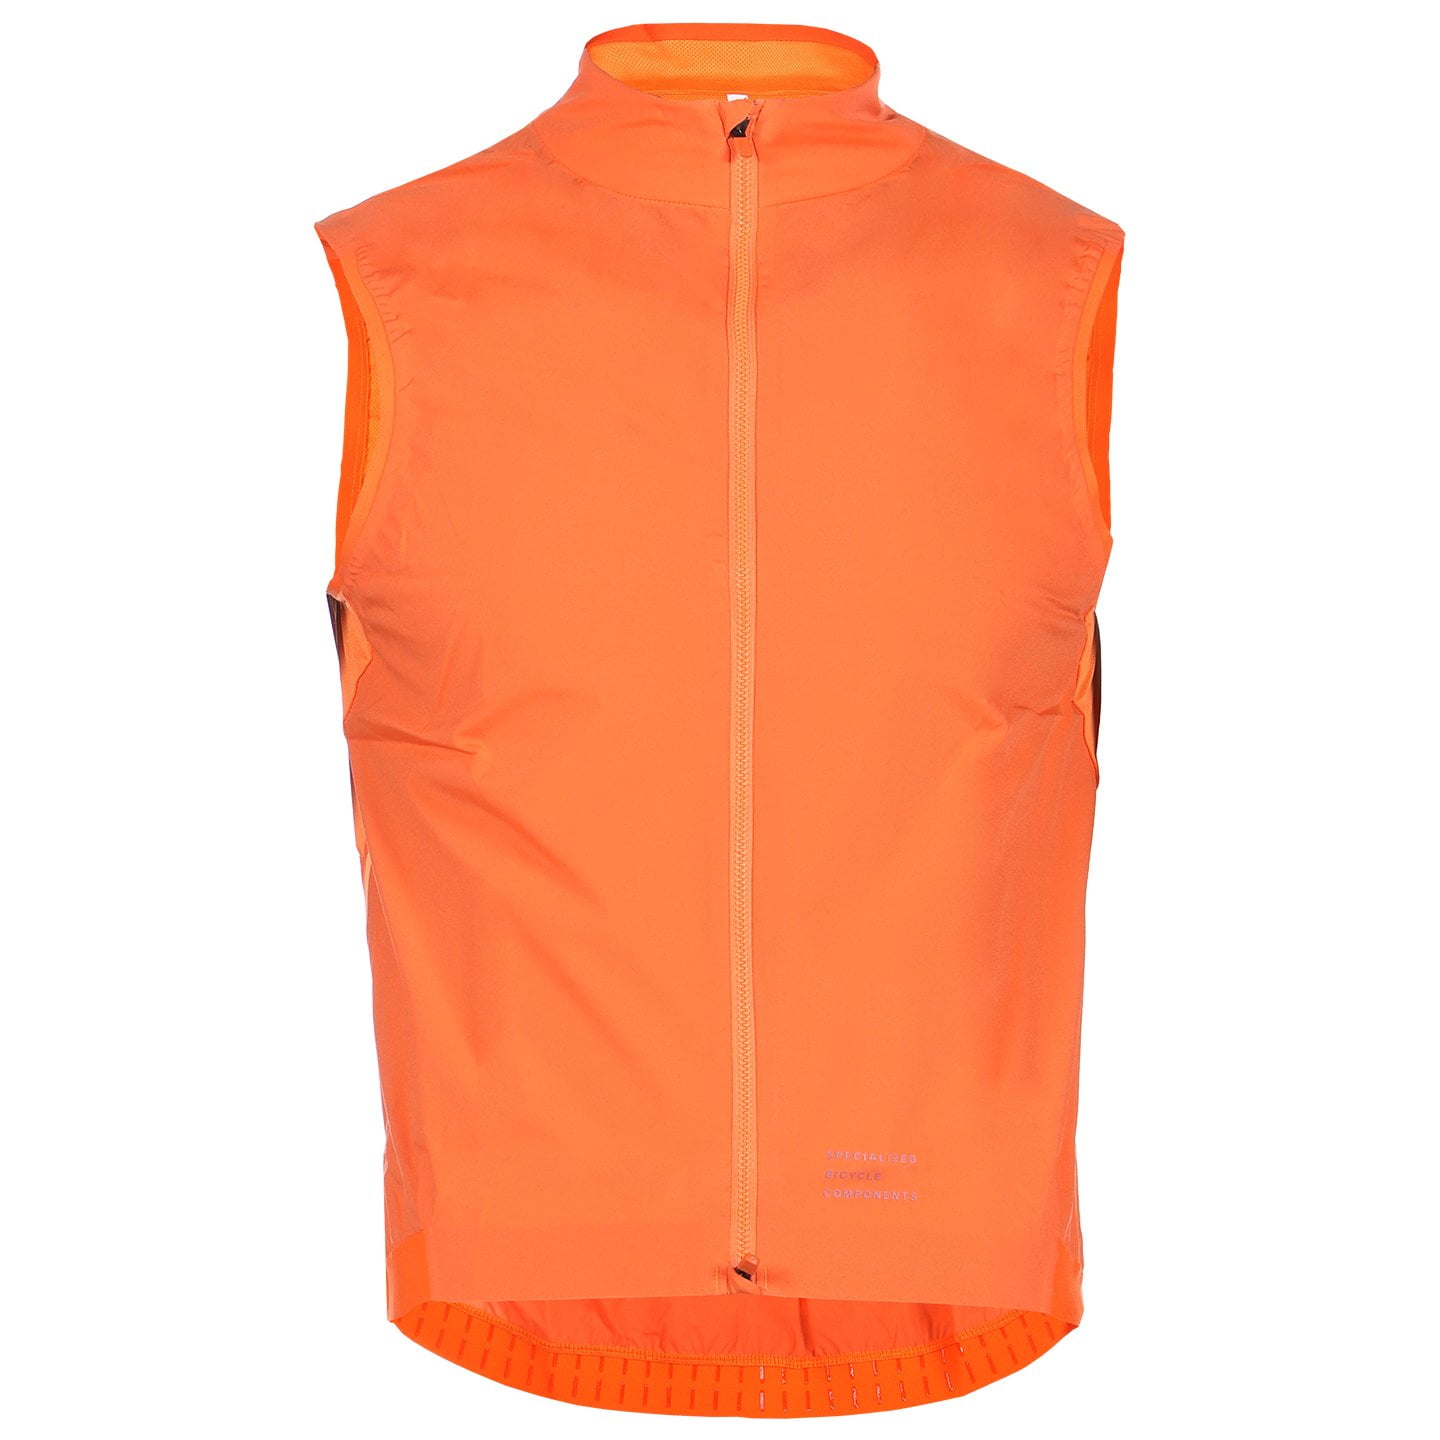 SPECIALIZED Prime Wind Vest Wind Vest, for men, size XL, Cycling vest, Cycling clothing